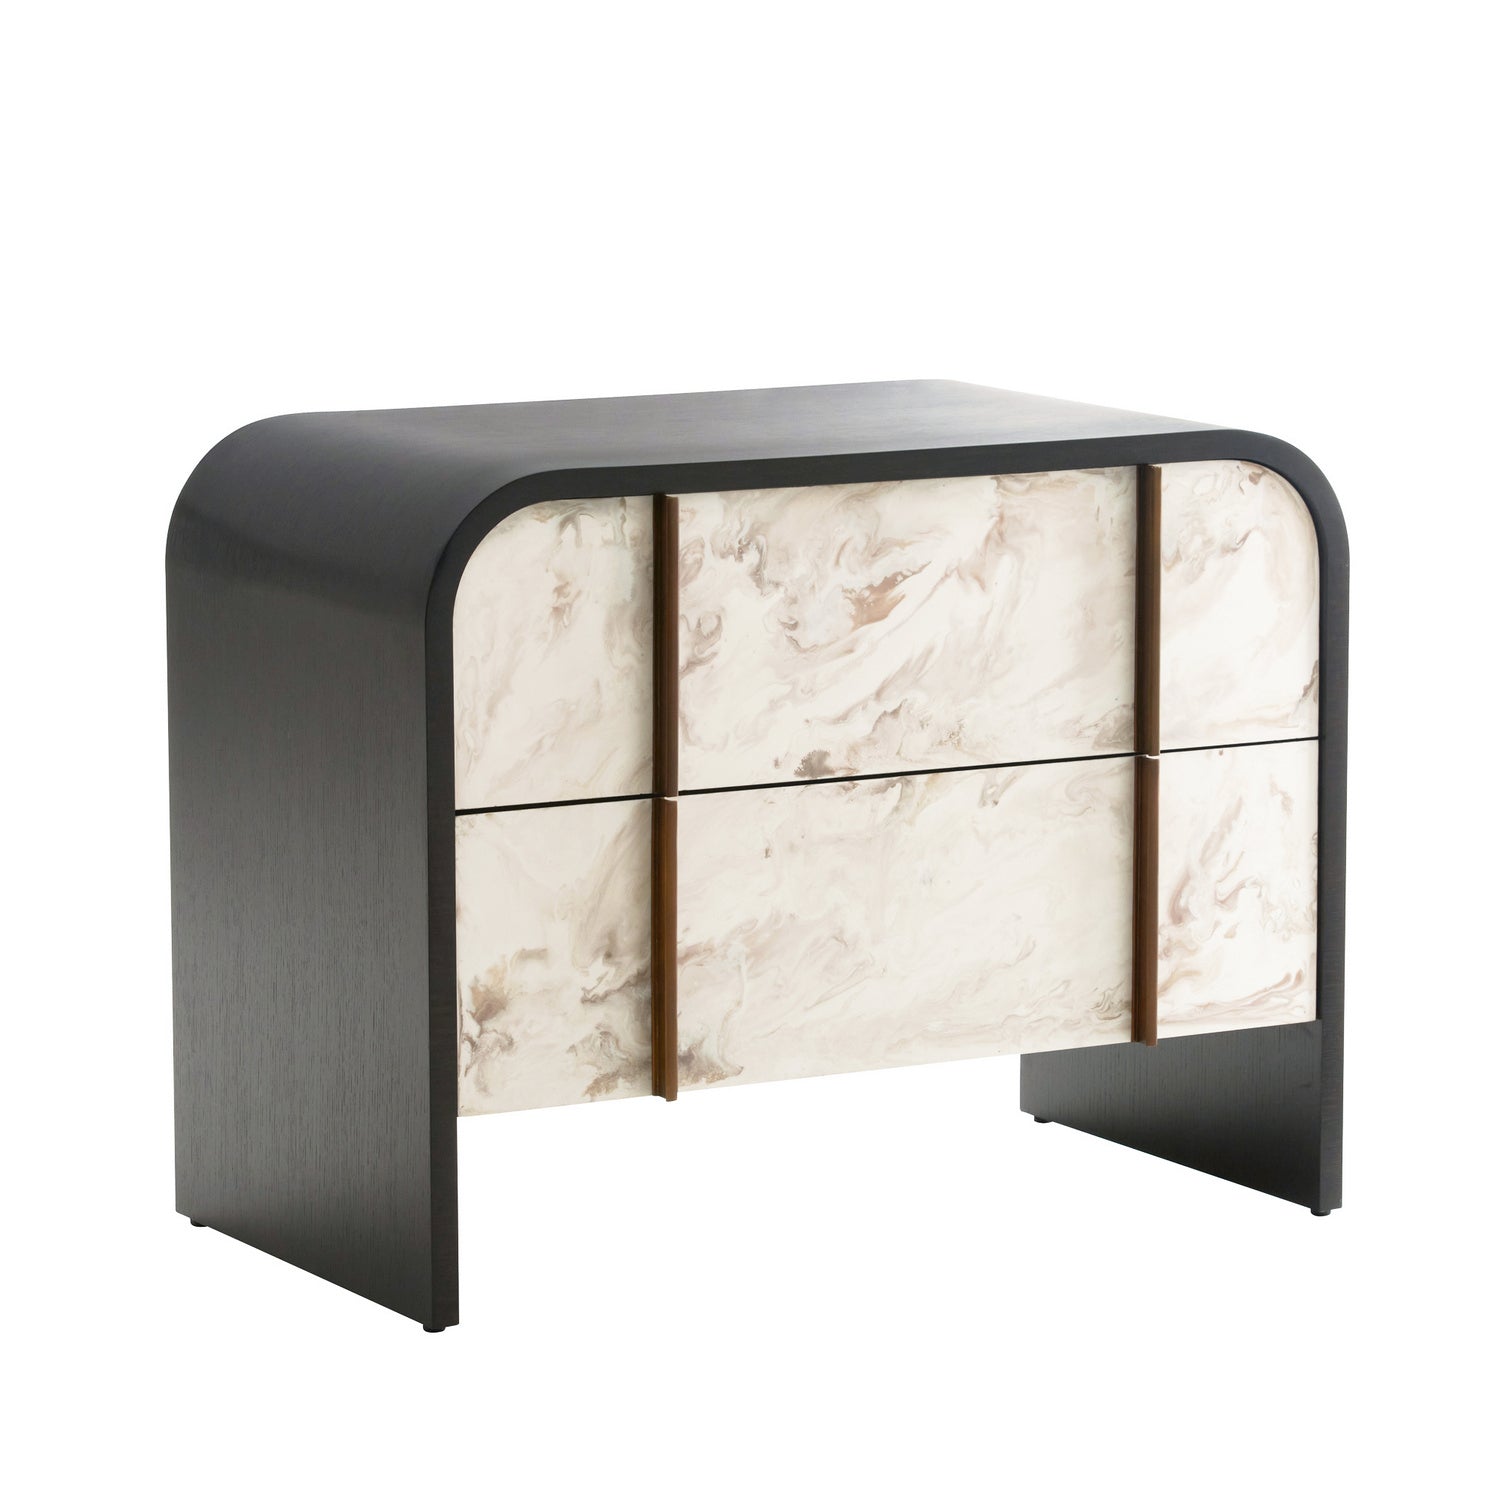 End Table from the Moira collection in Ebony finish